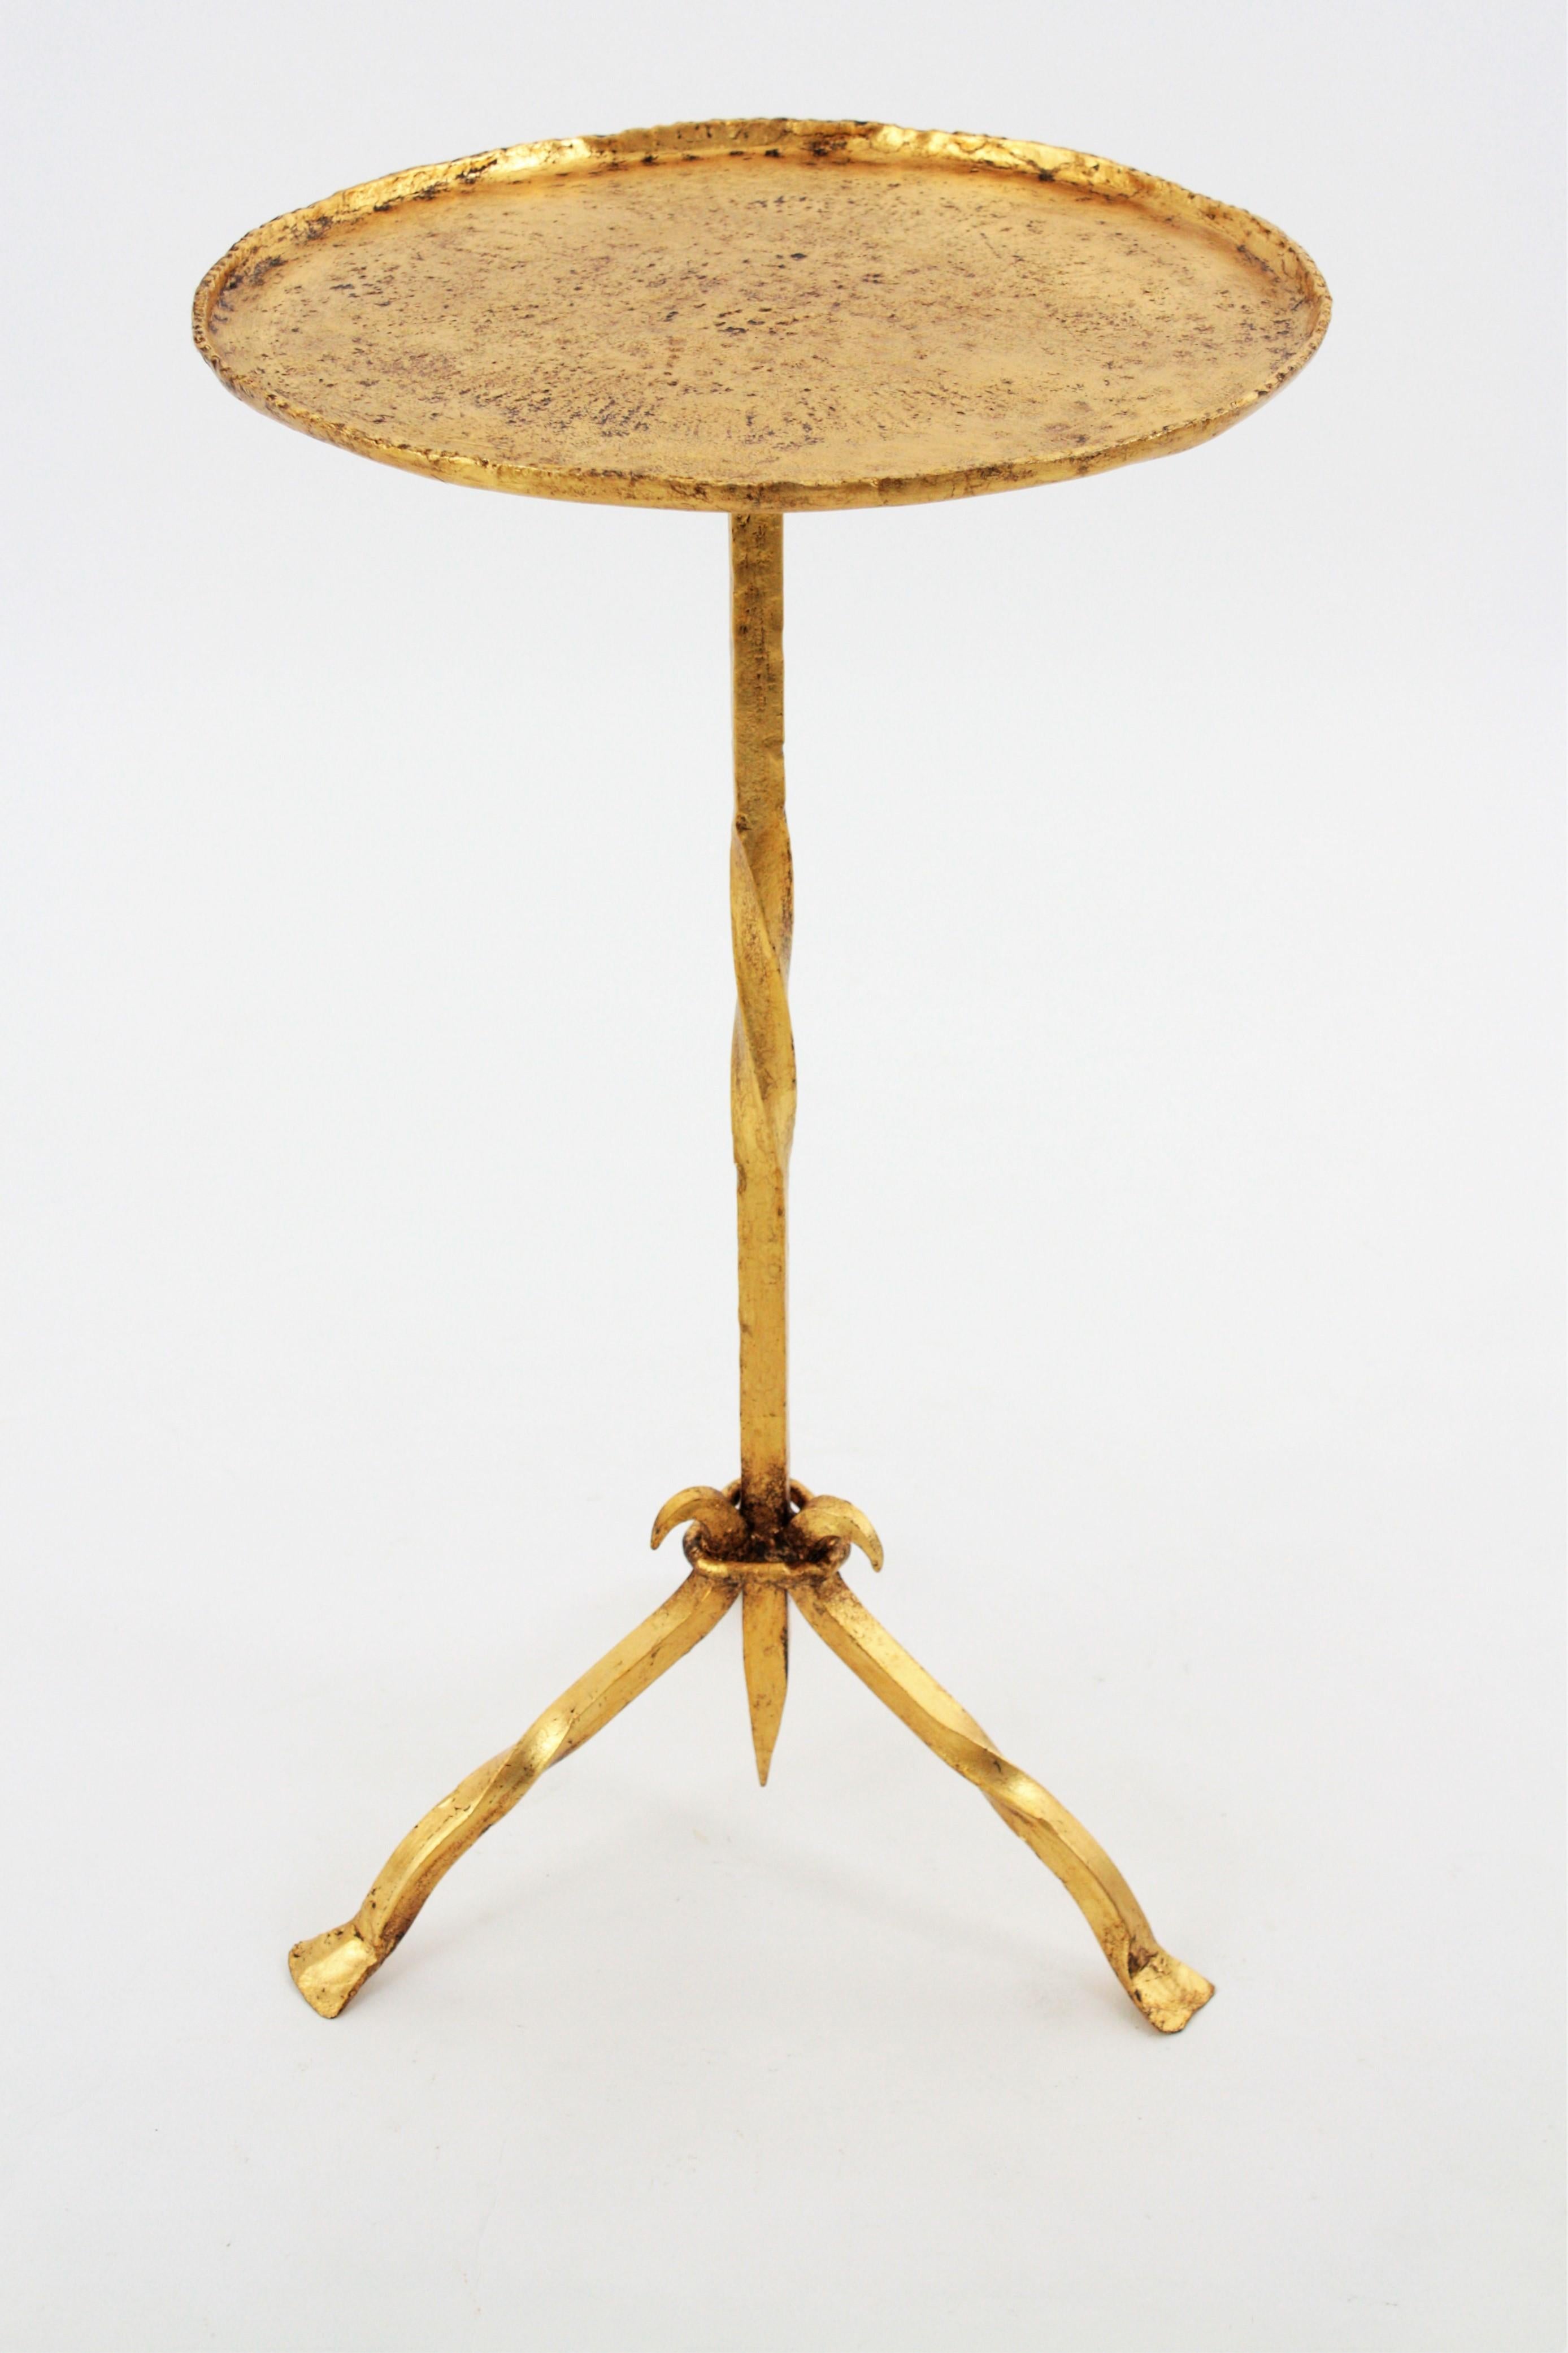 Hammered  Spanish Gothic Style Gold Leaf Gilt Iron Drinks Table, Stand or Side Table 